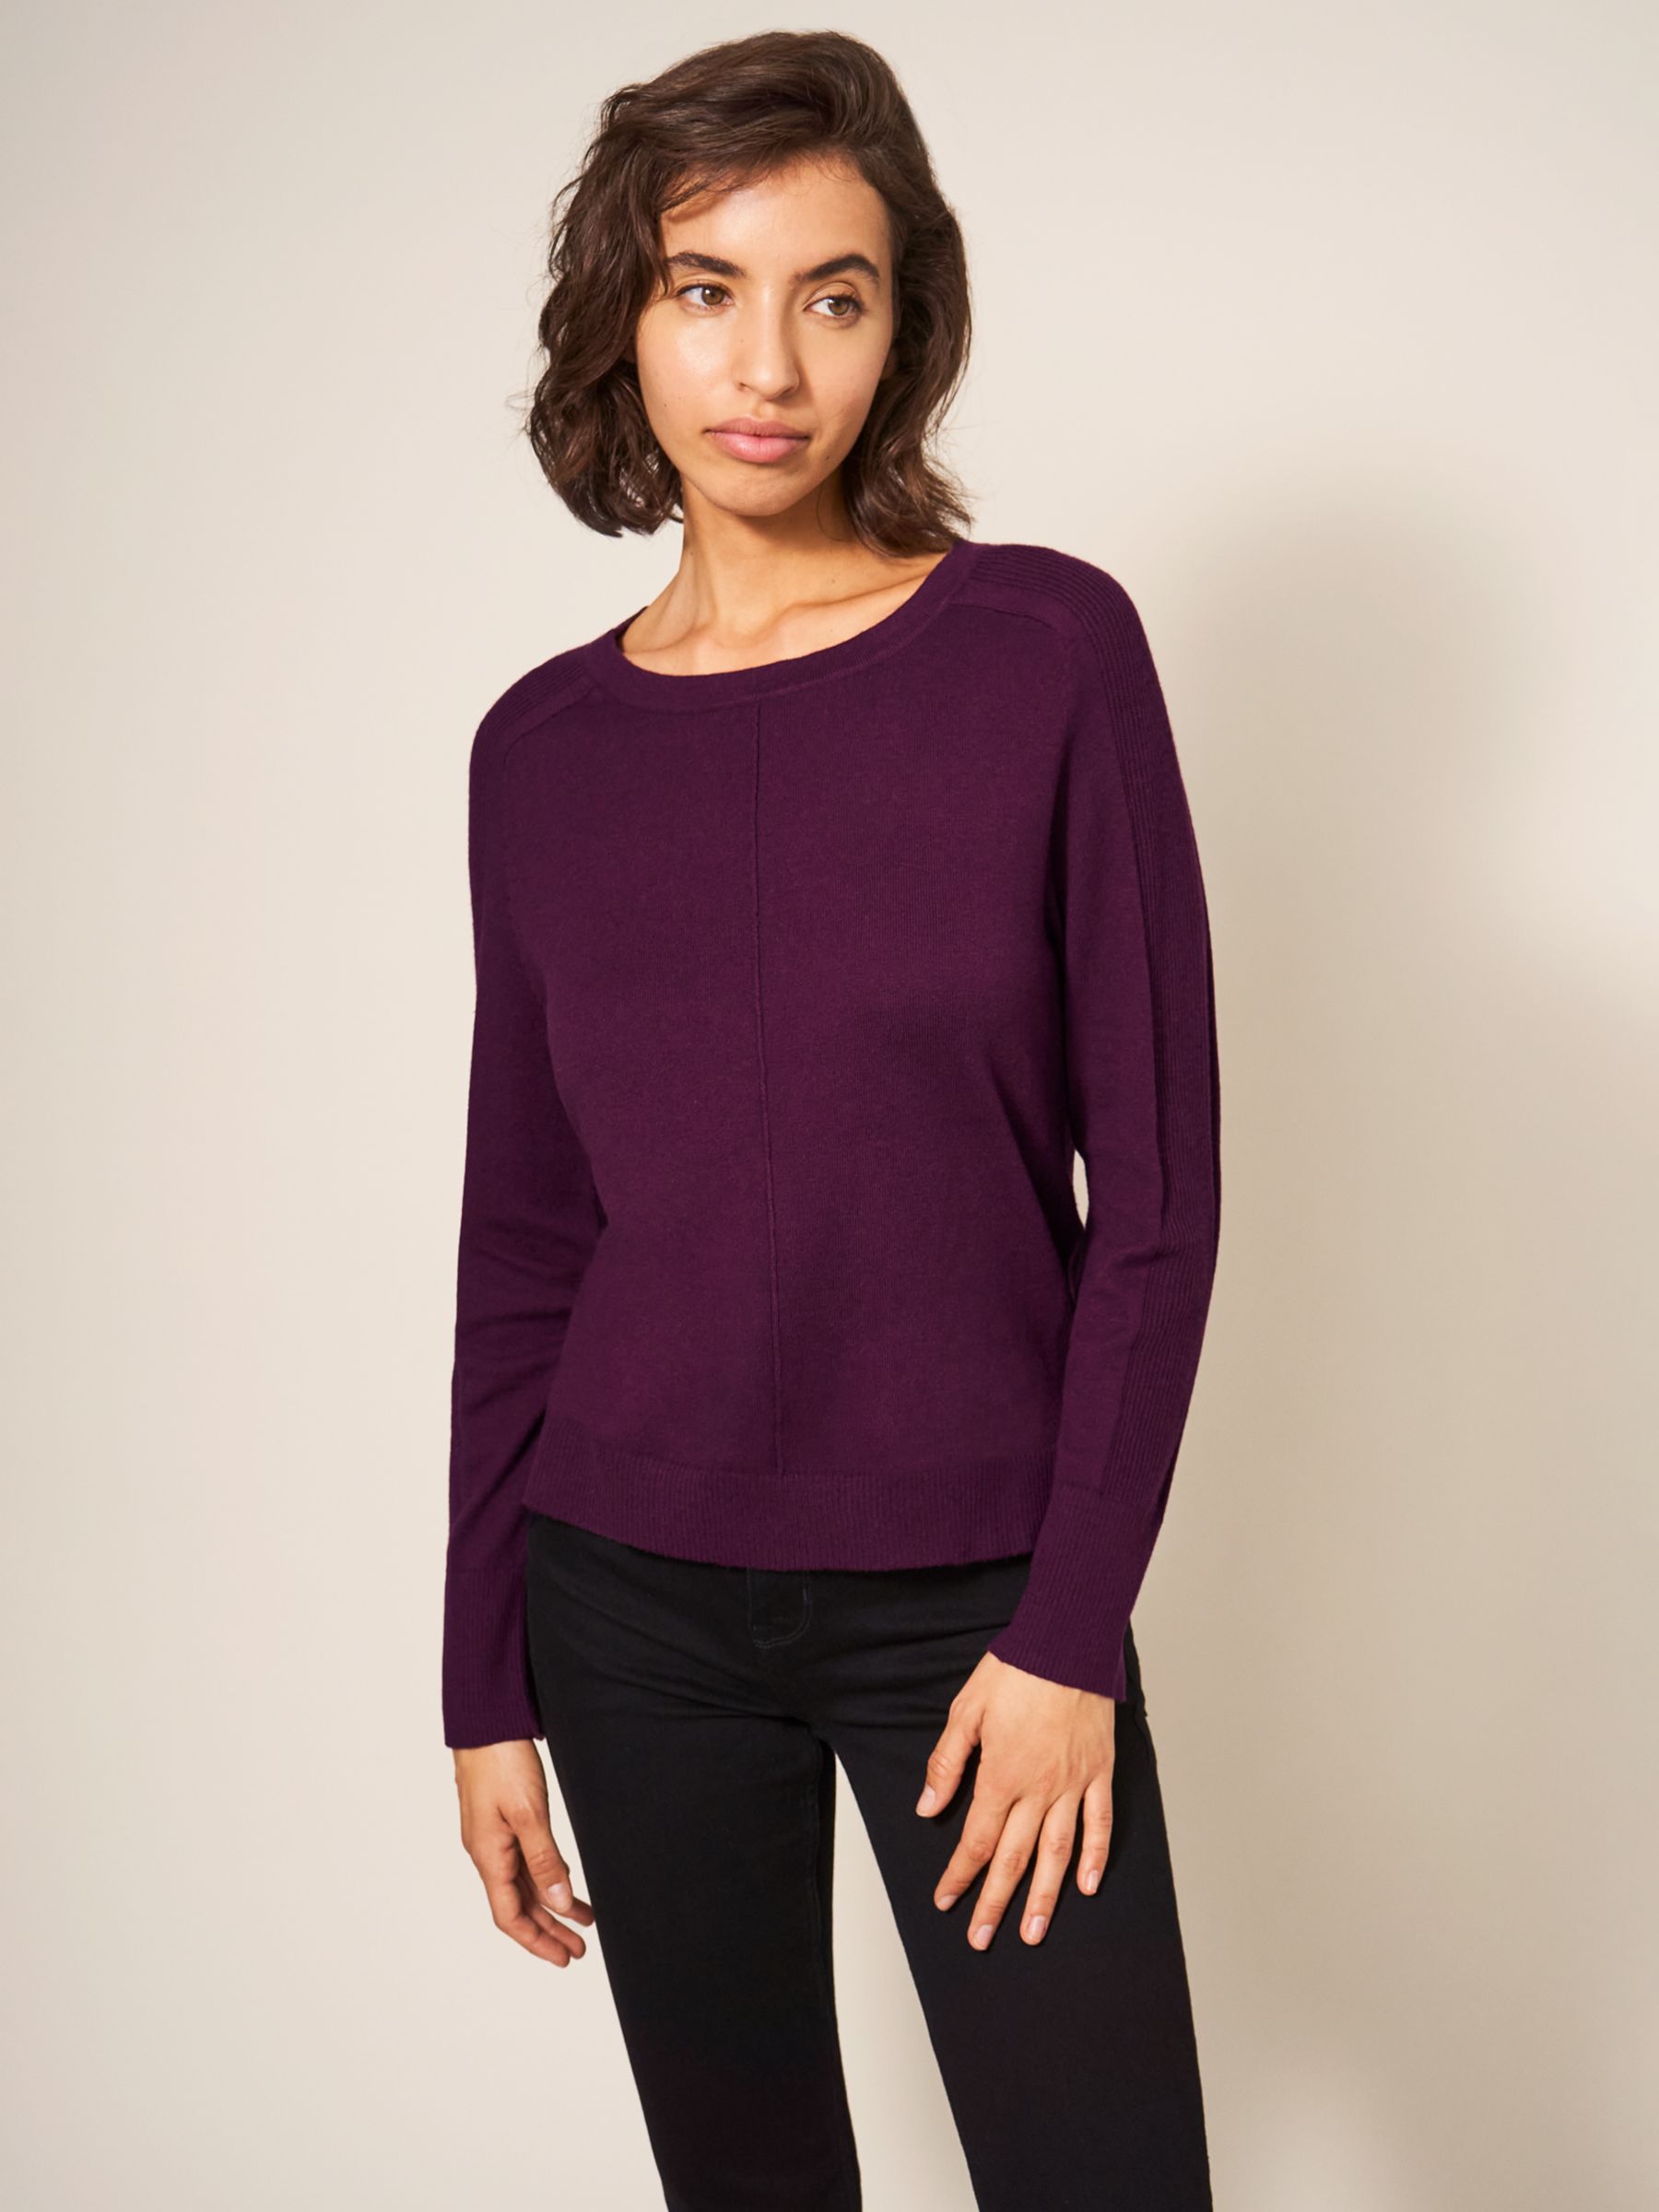 Women's Round Neck Long Sleeve Jumpers